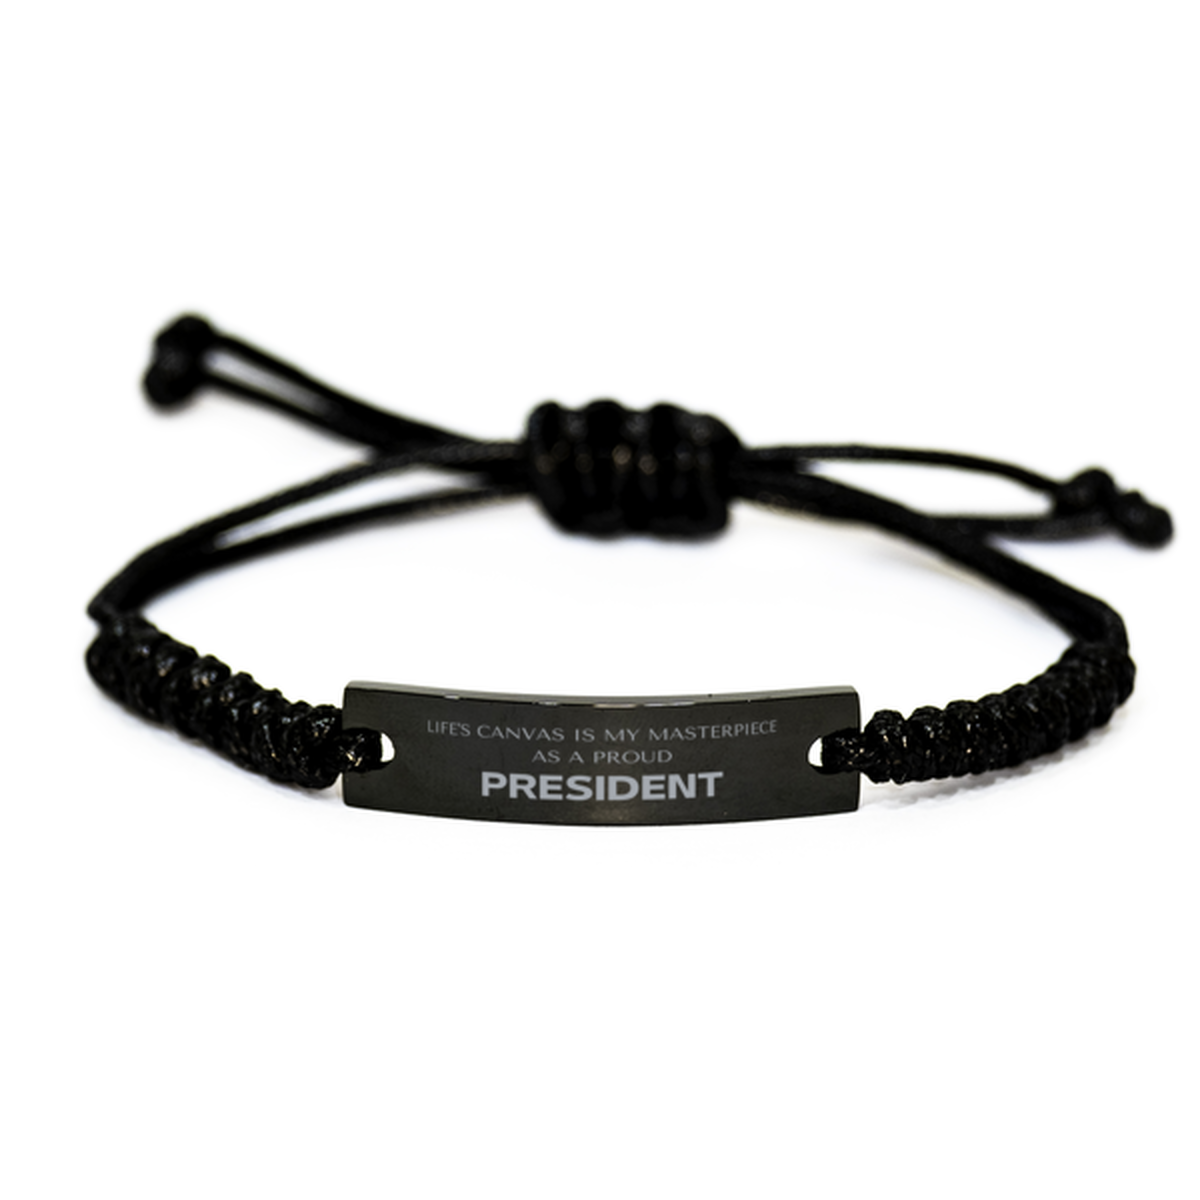 Proud President Gifts, Life's canvas is my masterpiece, Epic Birthday Christmas Unique Black Rope Bracelet For President, Coworkers, Men, Women, Friends